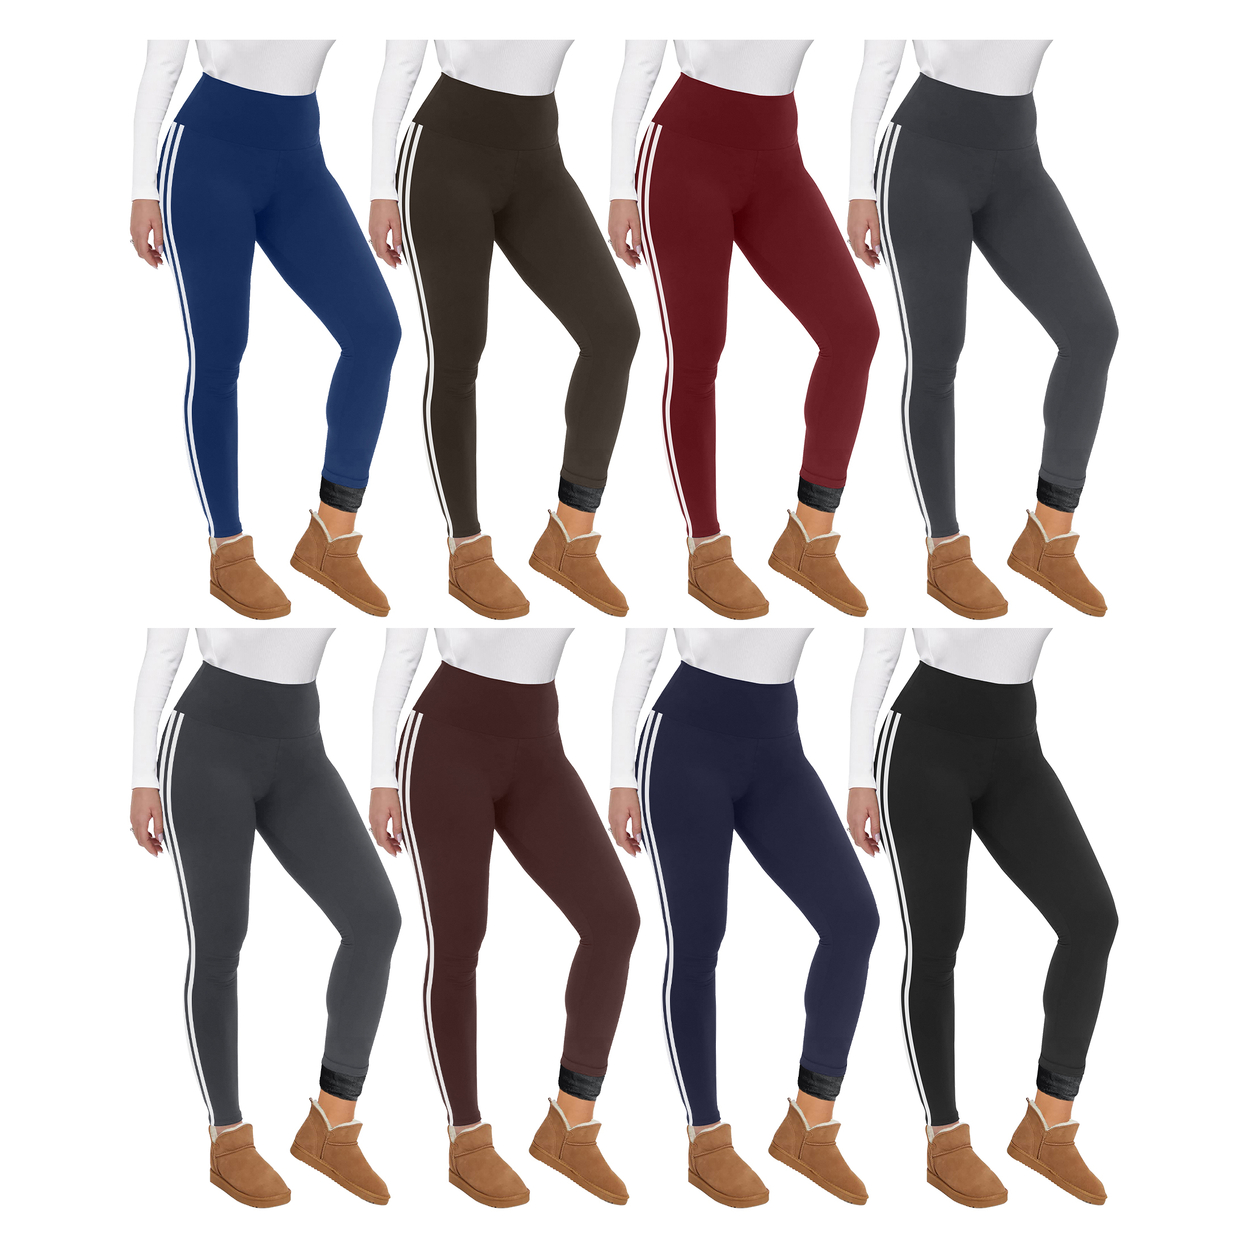 Women's Ultra-Soft Winter Warm Cozy Striped Fur Lined Yoga Leggings - Assorted, Large